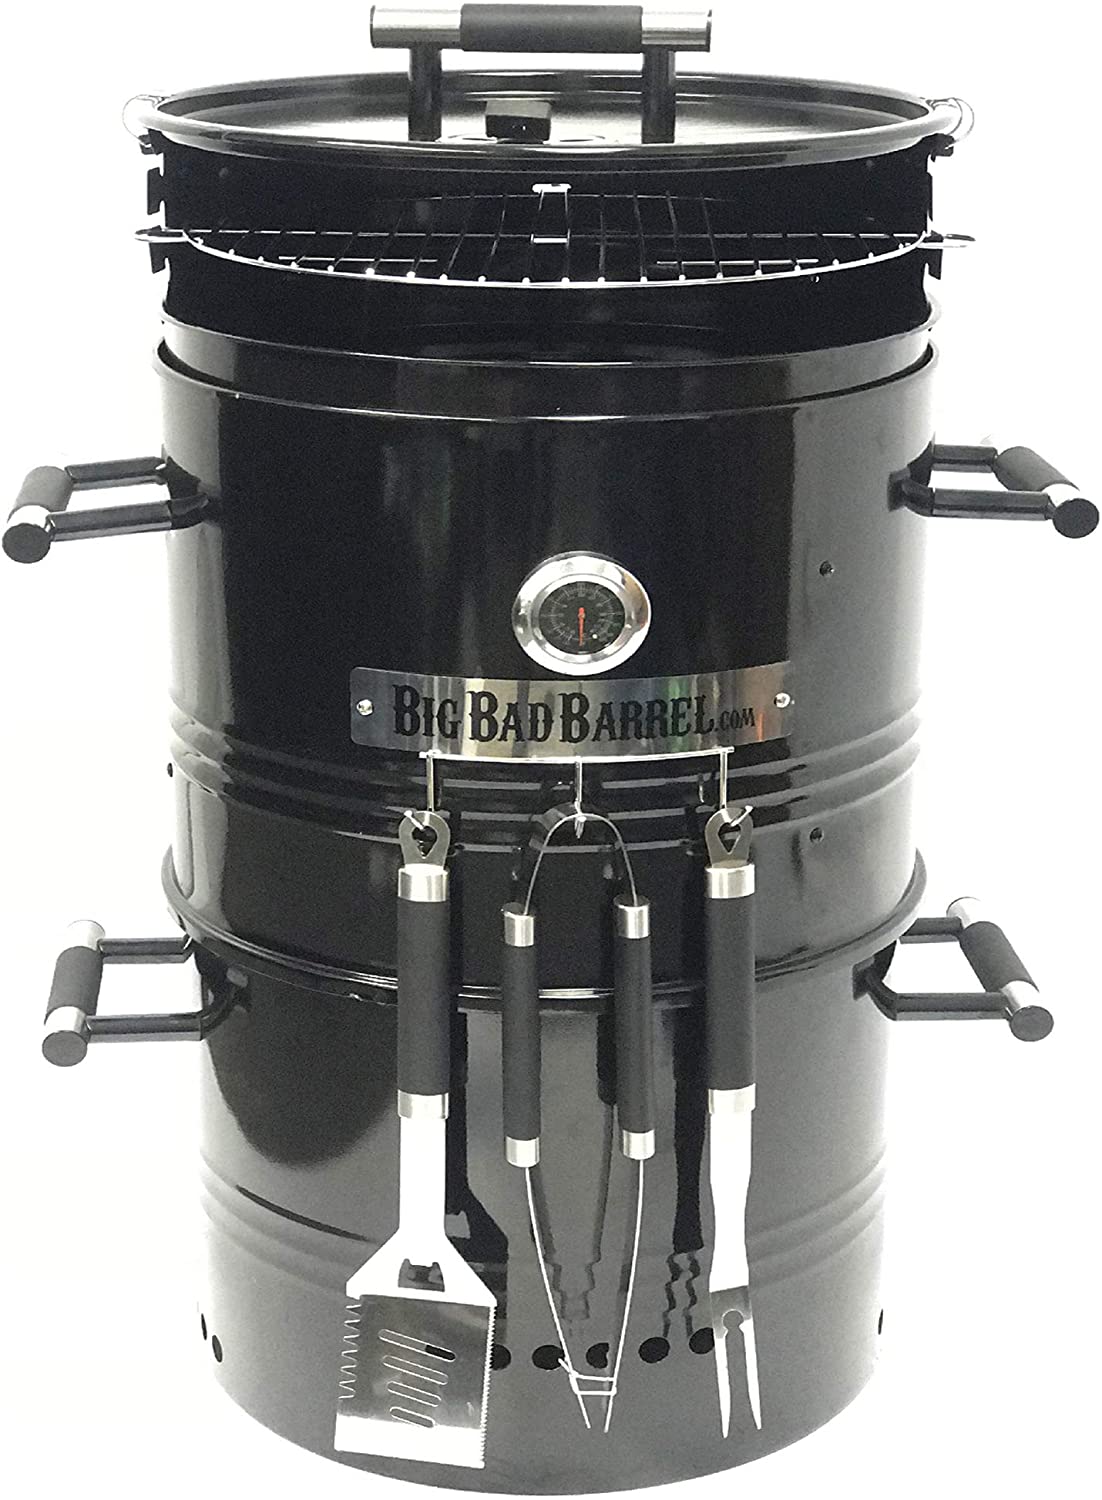 EasyGoProducts Big Bad Barrel Pit Charcoal Barbeque